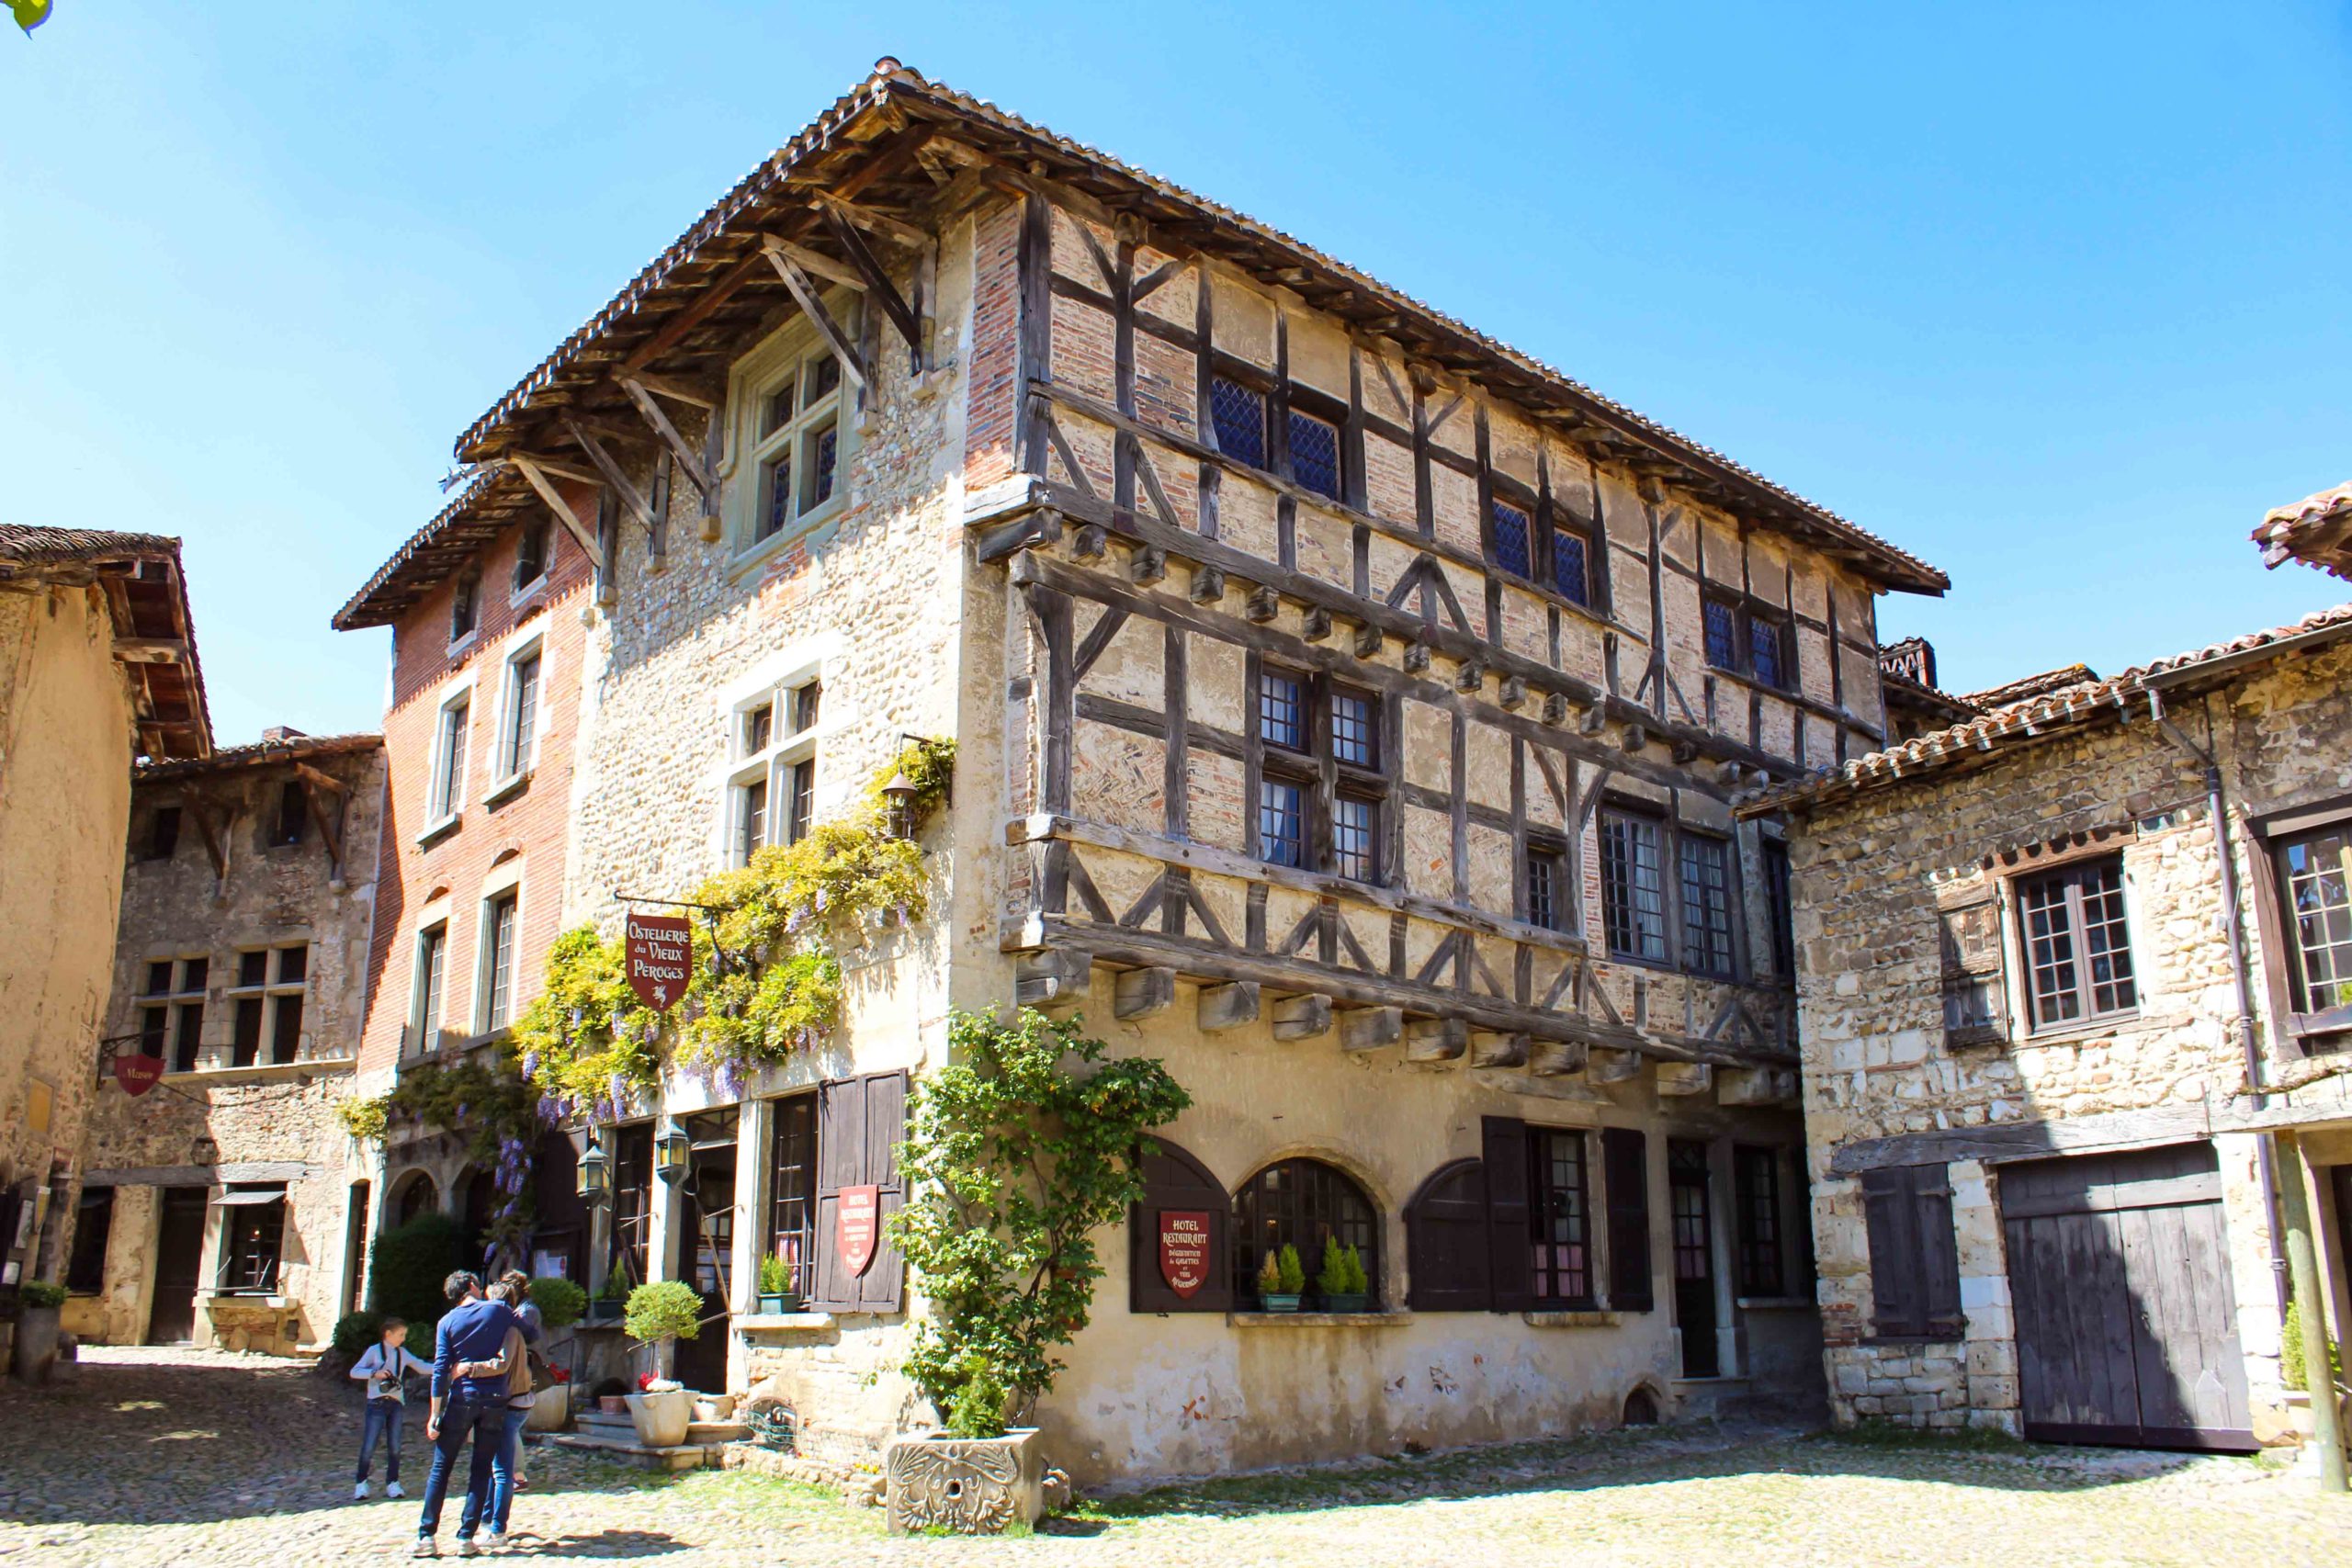 The Vieux Pérouges hostellerie © Chabe01 - licence [CC BY-SA 4.0] from Wikimedia Commons